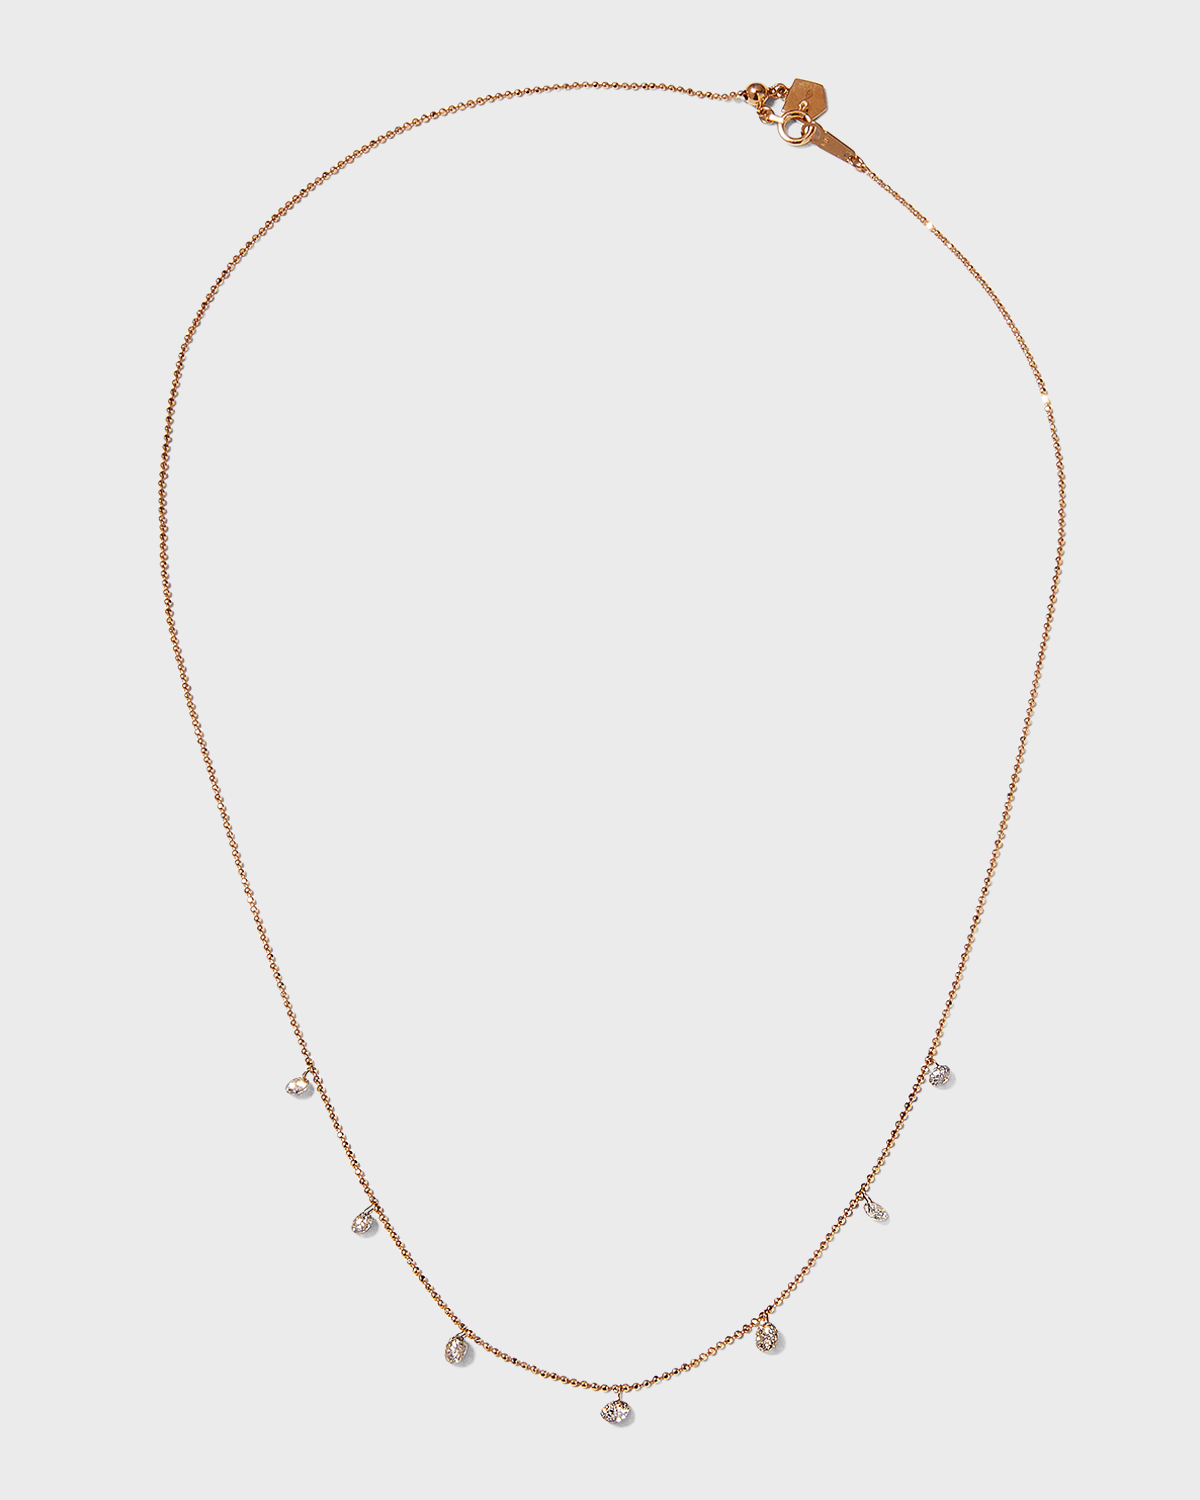 Graziela Gems Small Floating Diamond Necklace in Rose